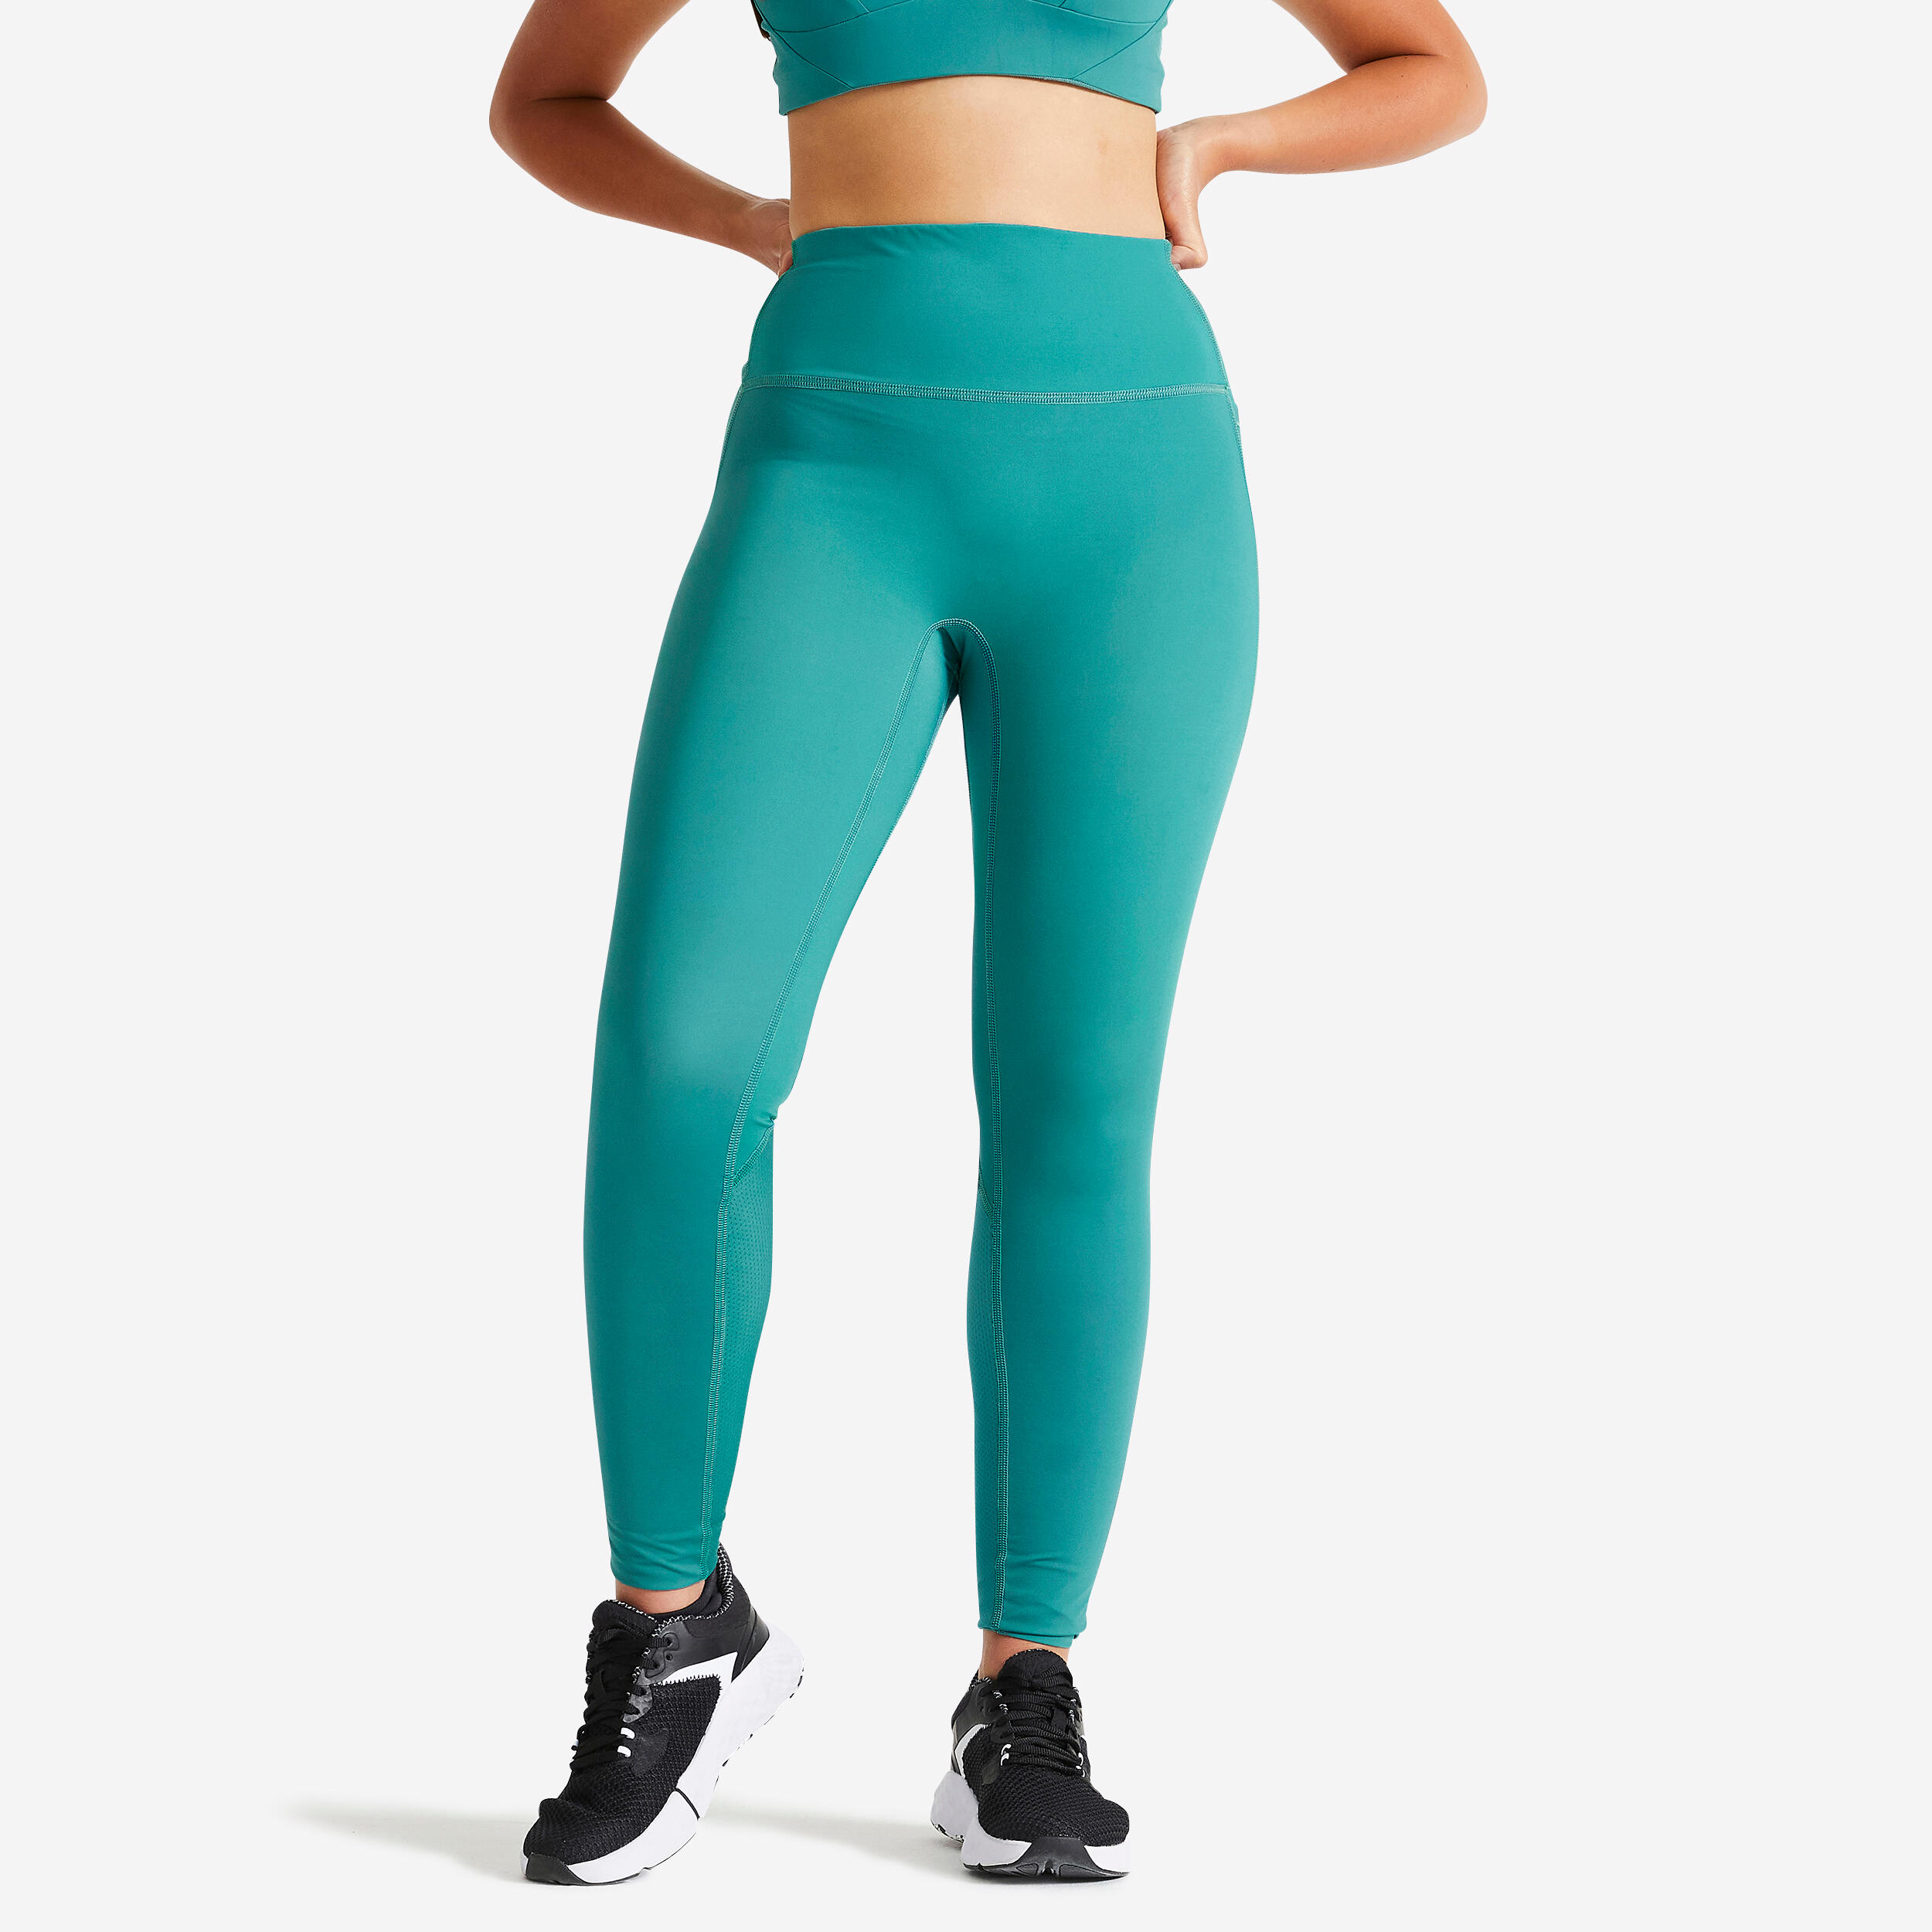 DOMYOS Women's shaping fitness cardio high-waisted leggings, teal